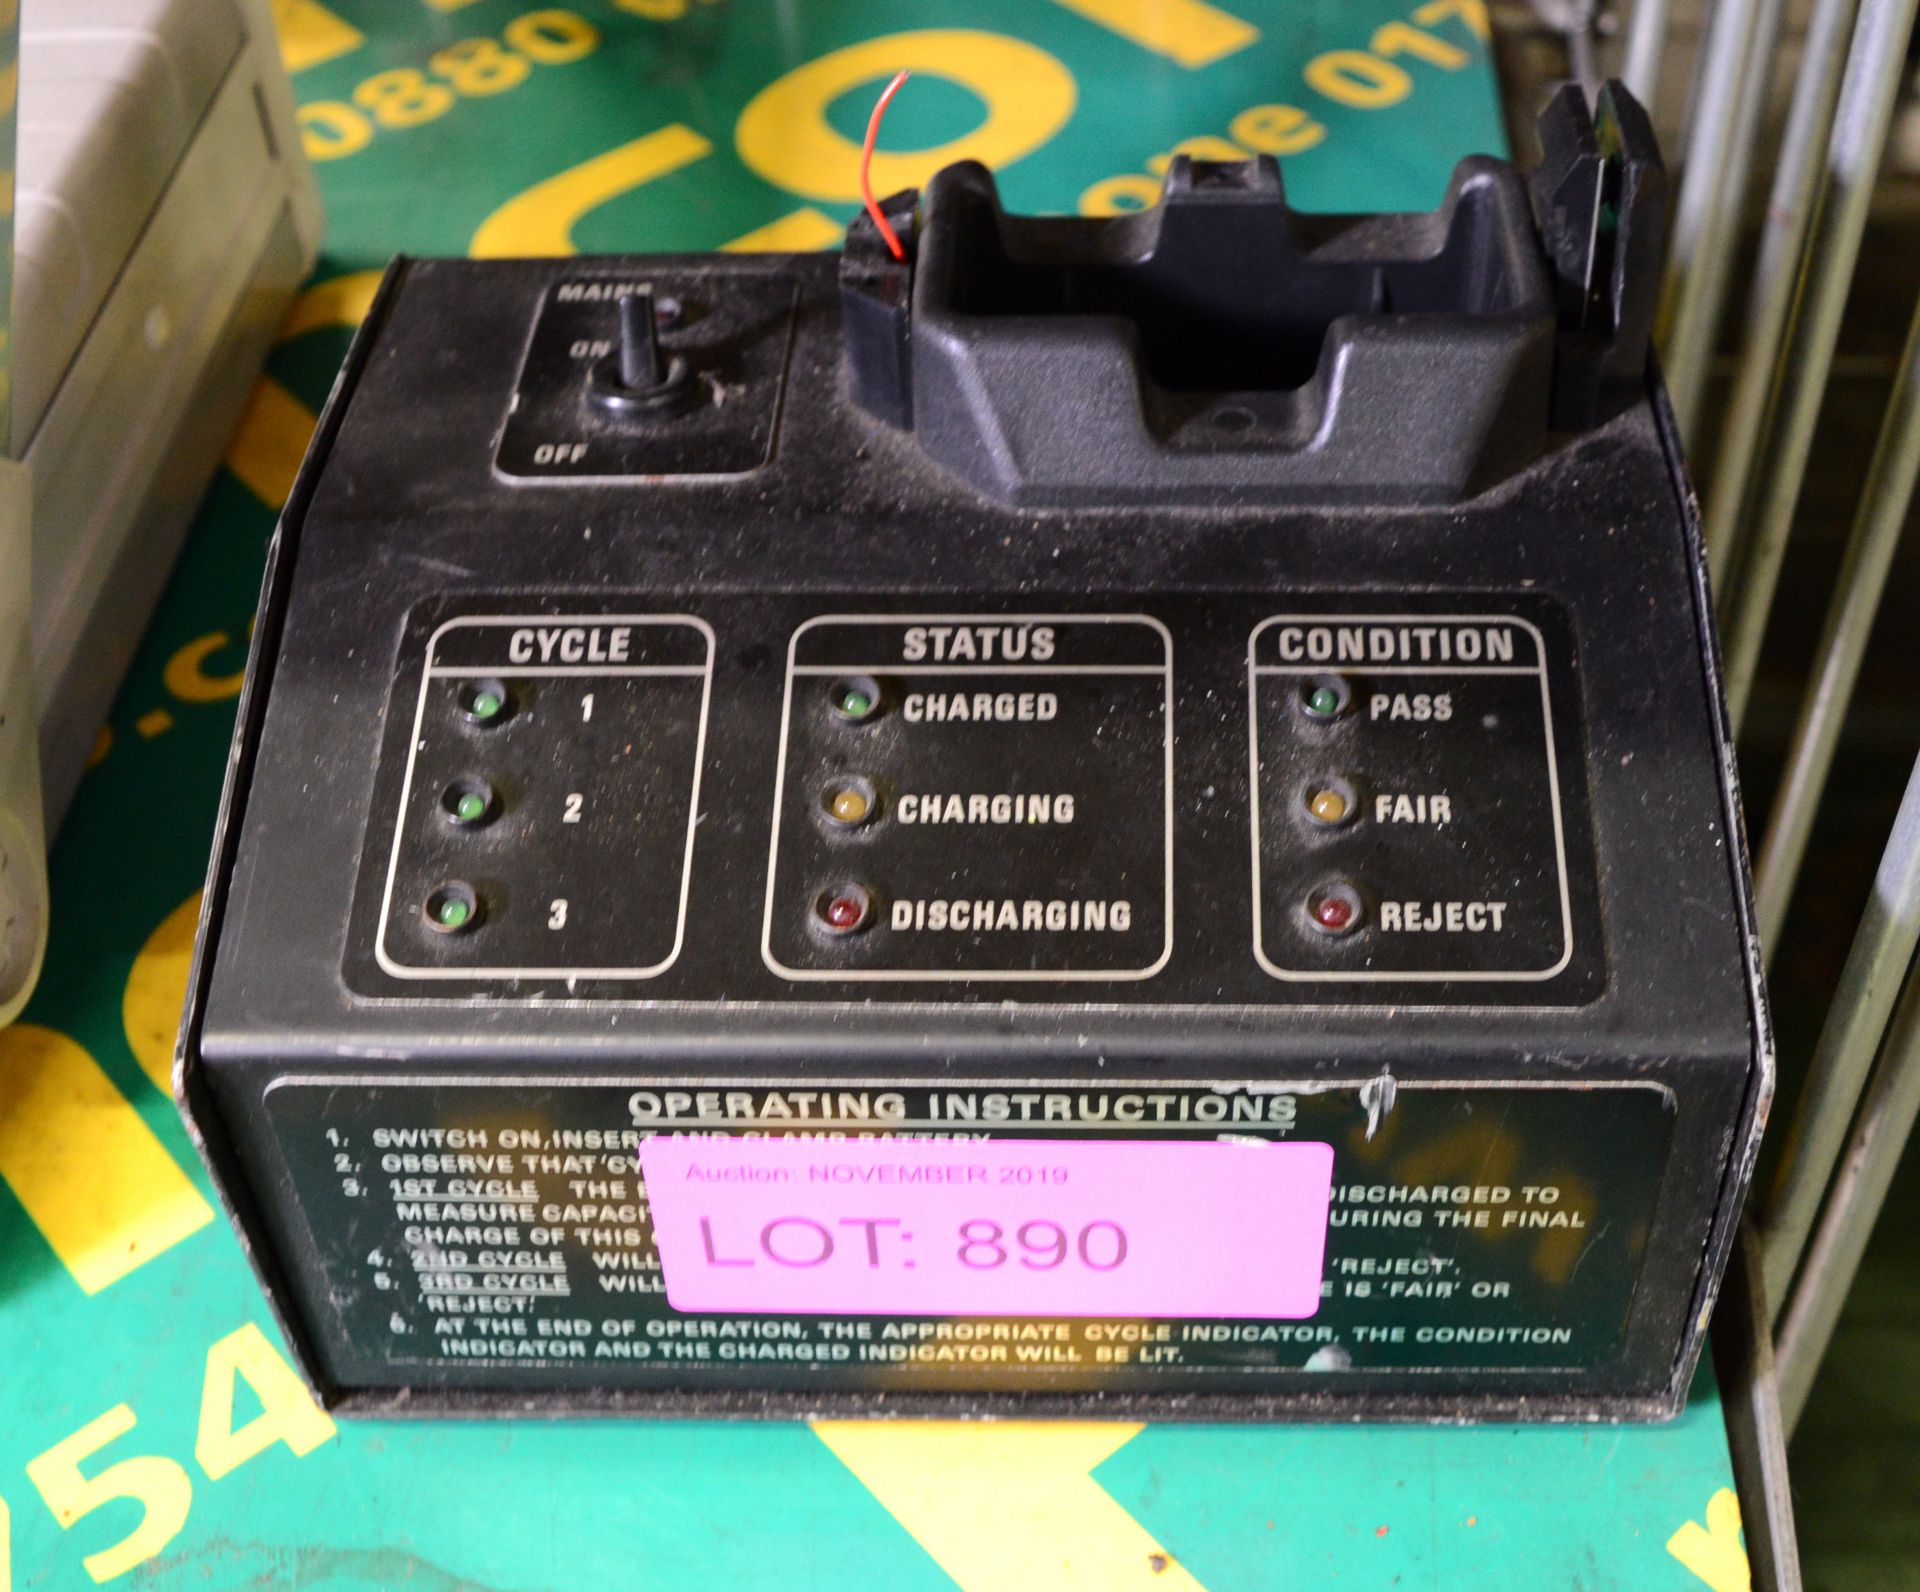 Cougar Battery Charger - Top missing.